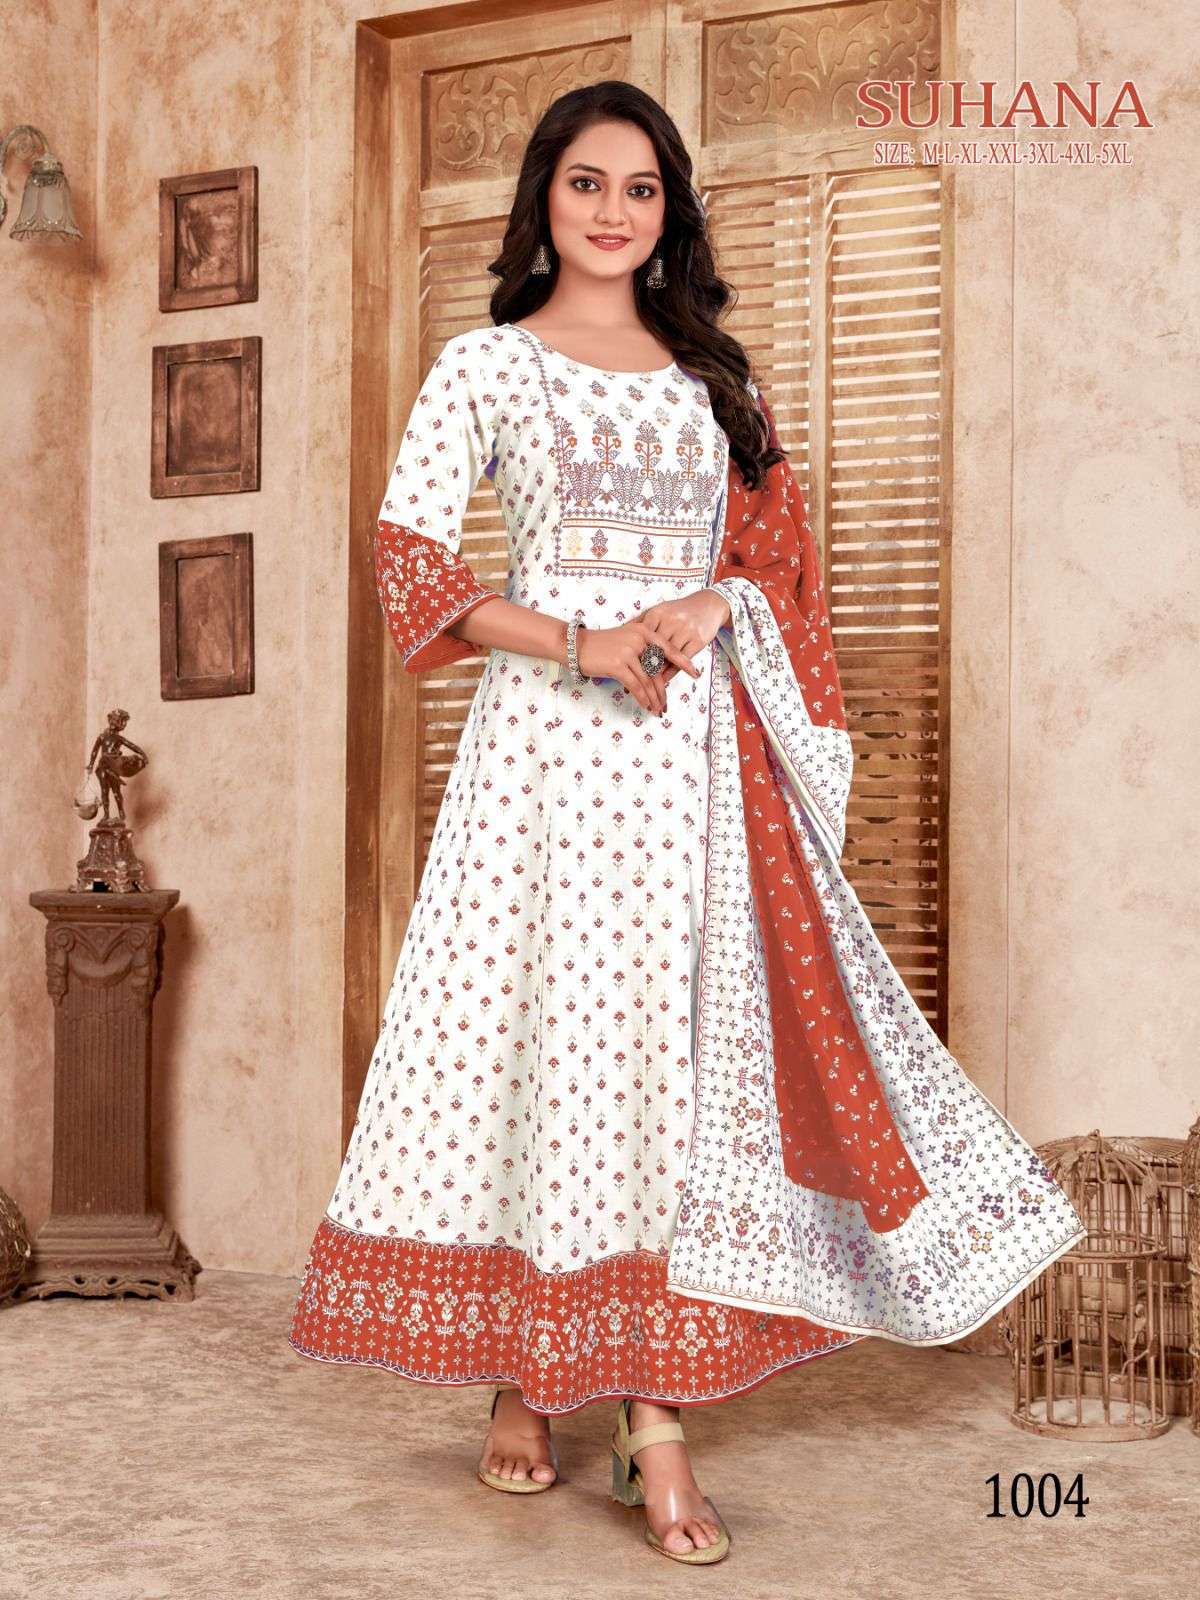 White colour gives feeling of purity 🥰🥰 | Casual indian fashion, Indian  fashion, Dress indian style